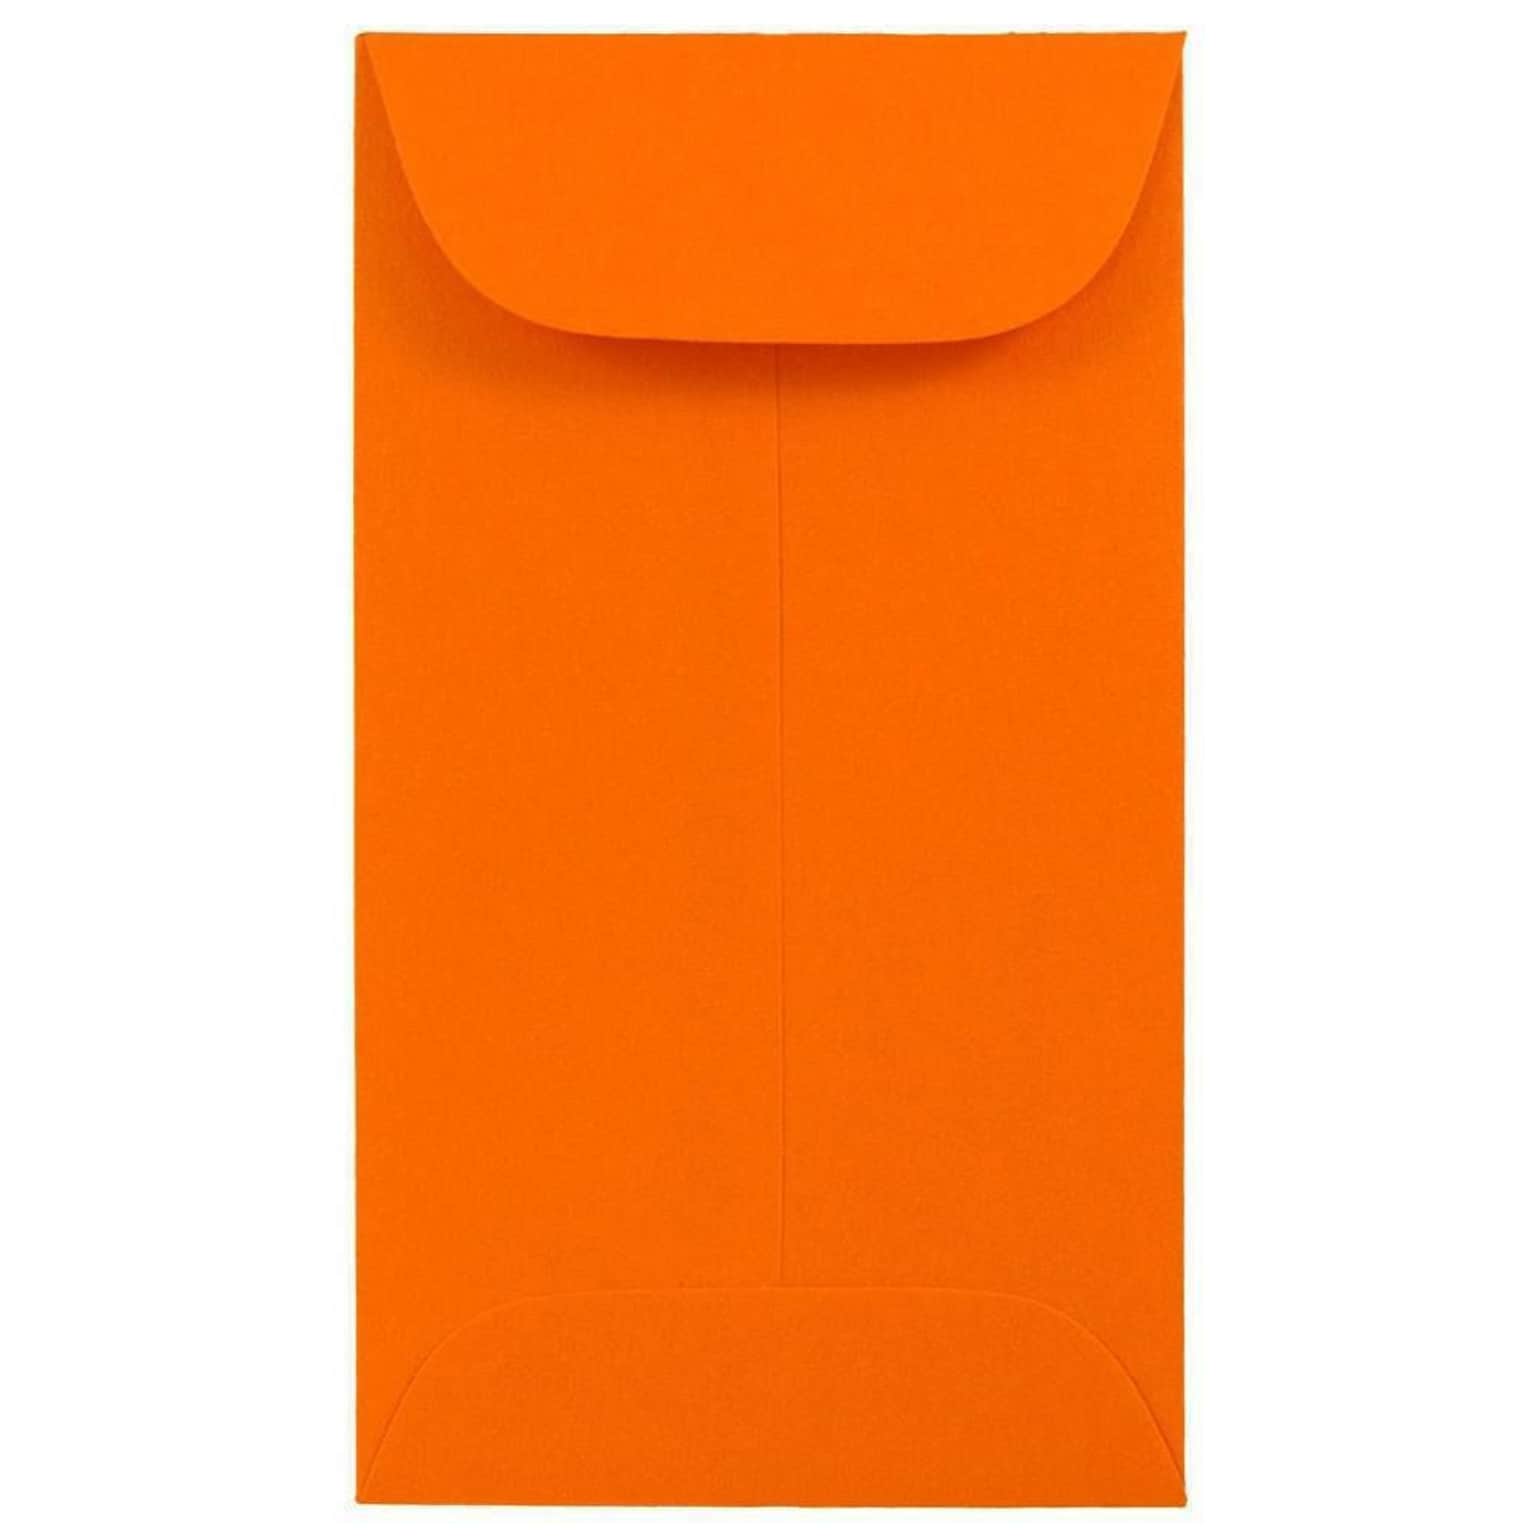 JAM Paper #5.5 Coin Business Colored Envelopes, 3.125 x 5.5, Orange Recycled, 25/Pack (356730548)